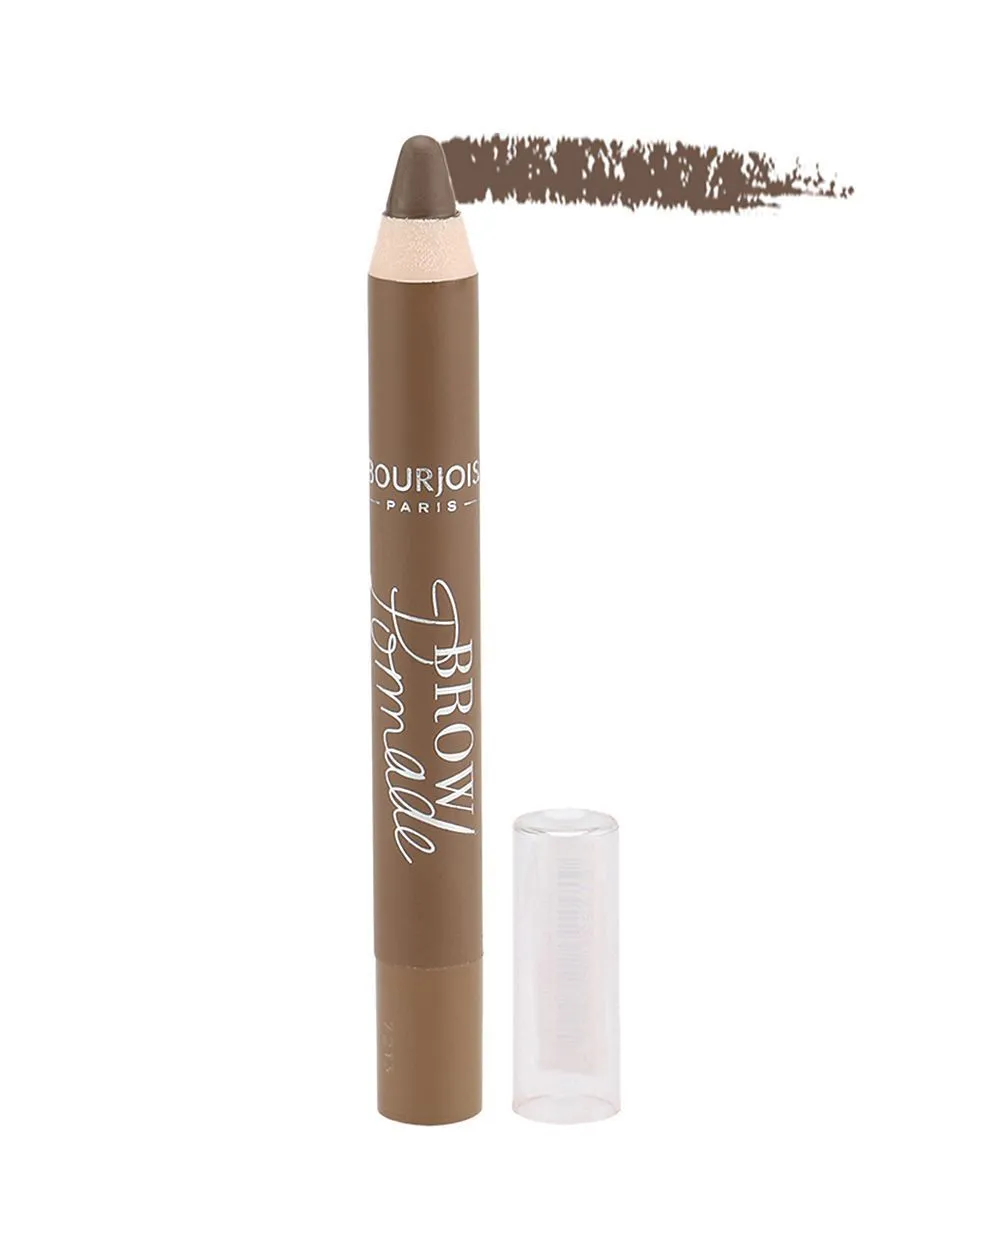 Brow Pomade Crayon Pencil by Bourjois, one of the best French makeup brands.